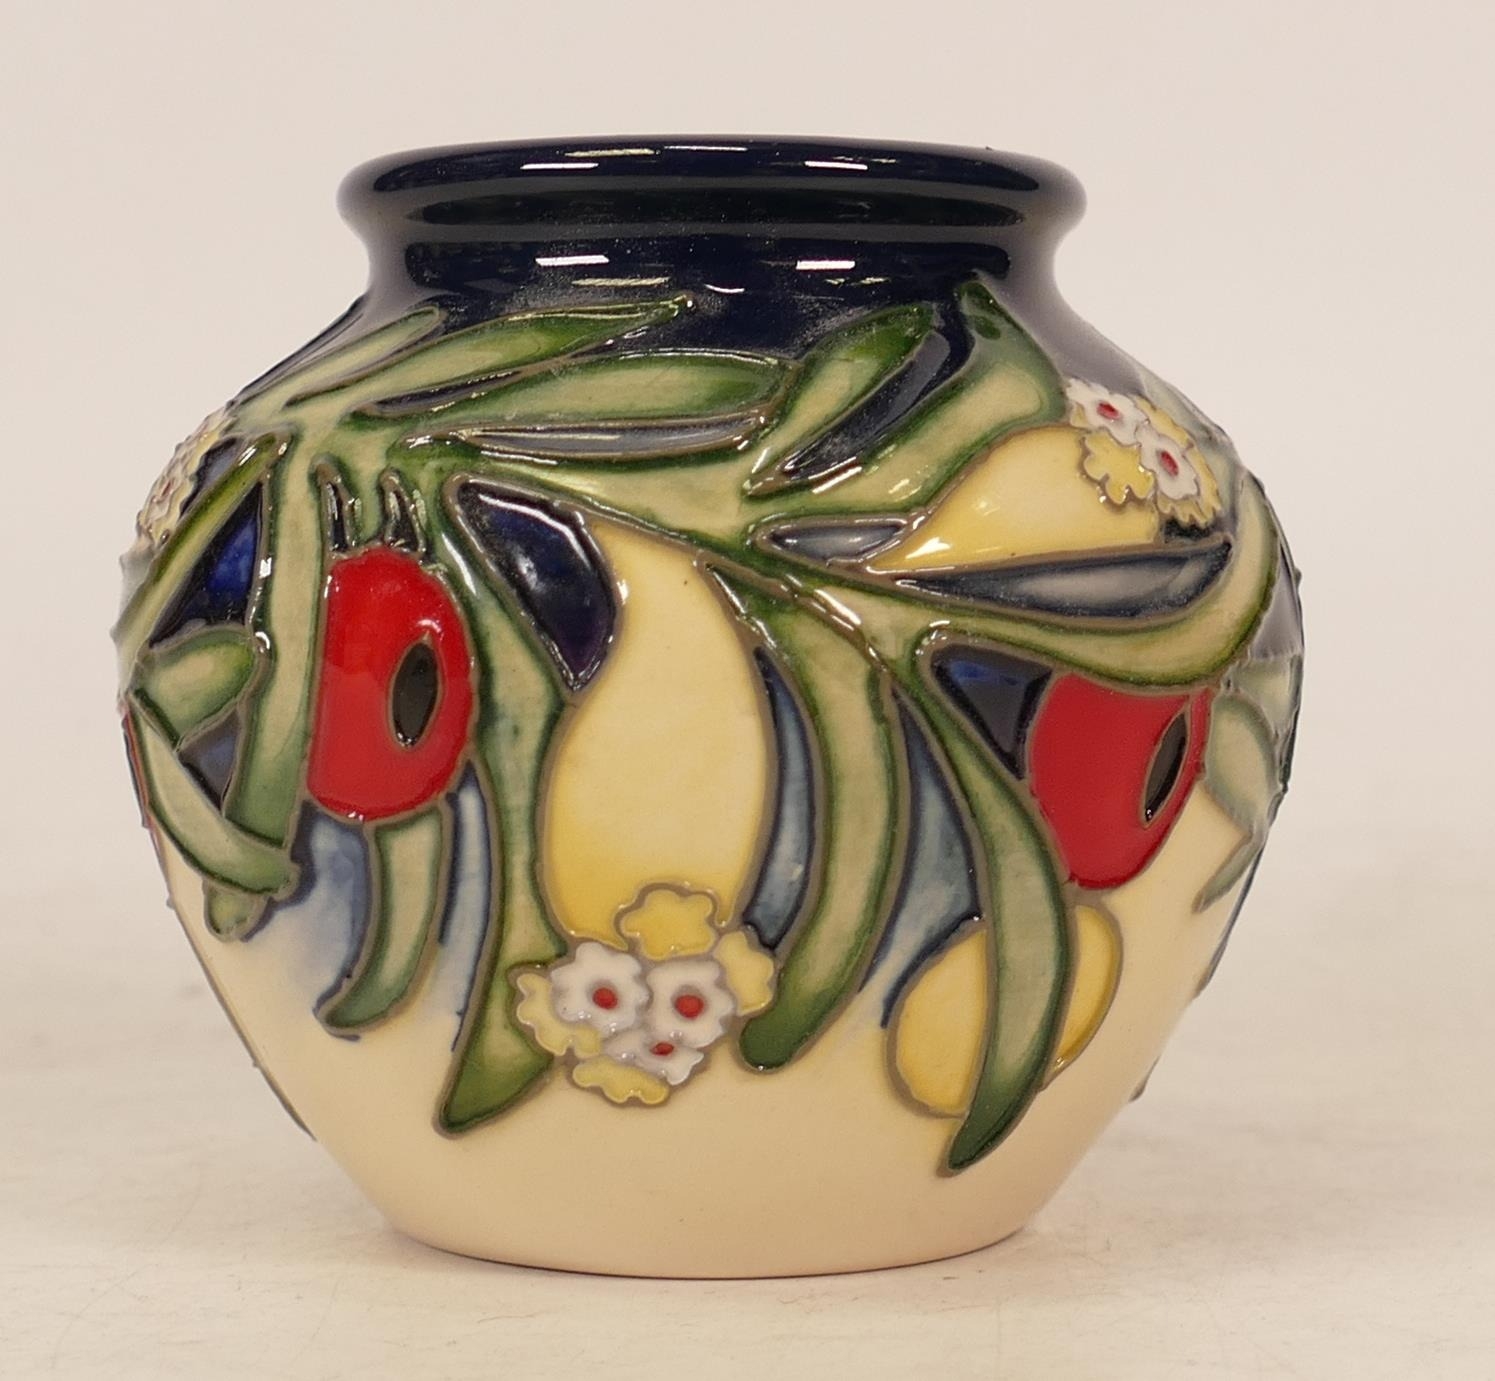 Moorcroft limited edition vase decorated with red berries and green foliage on blue and cream